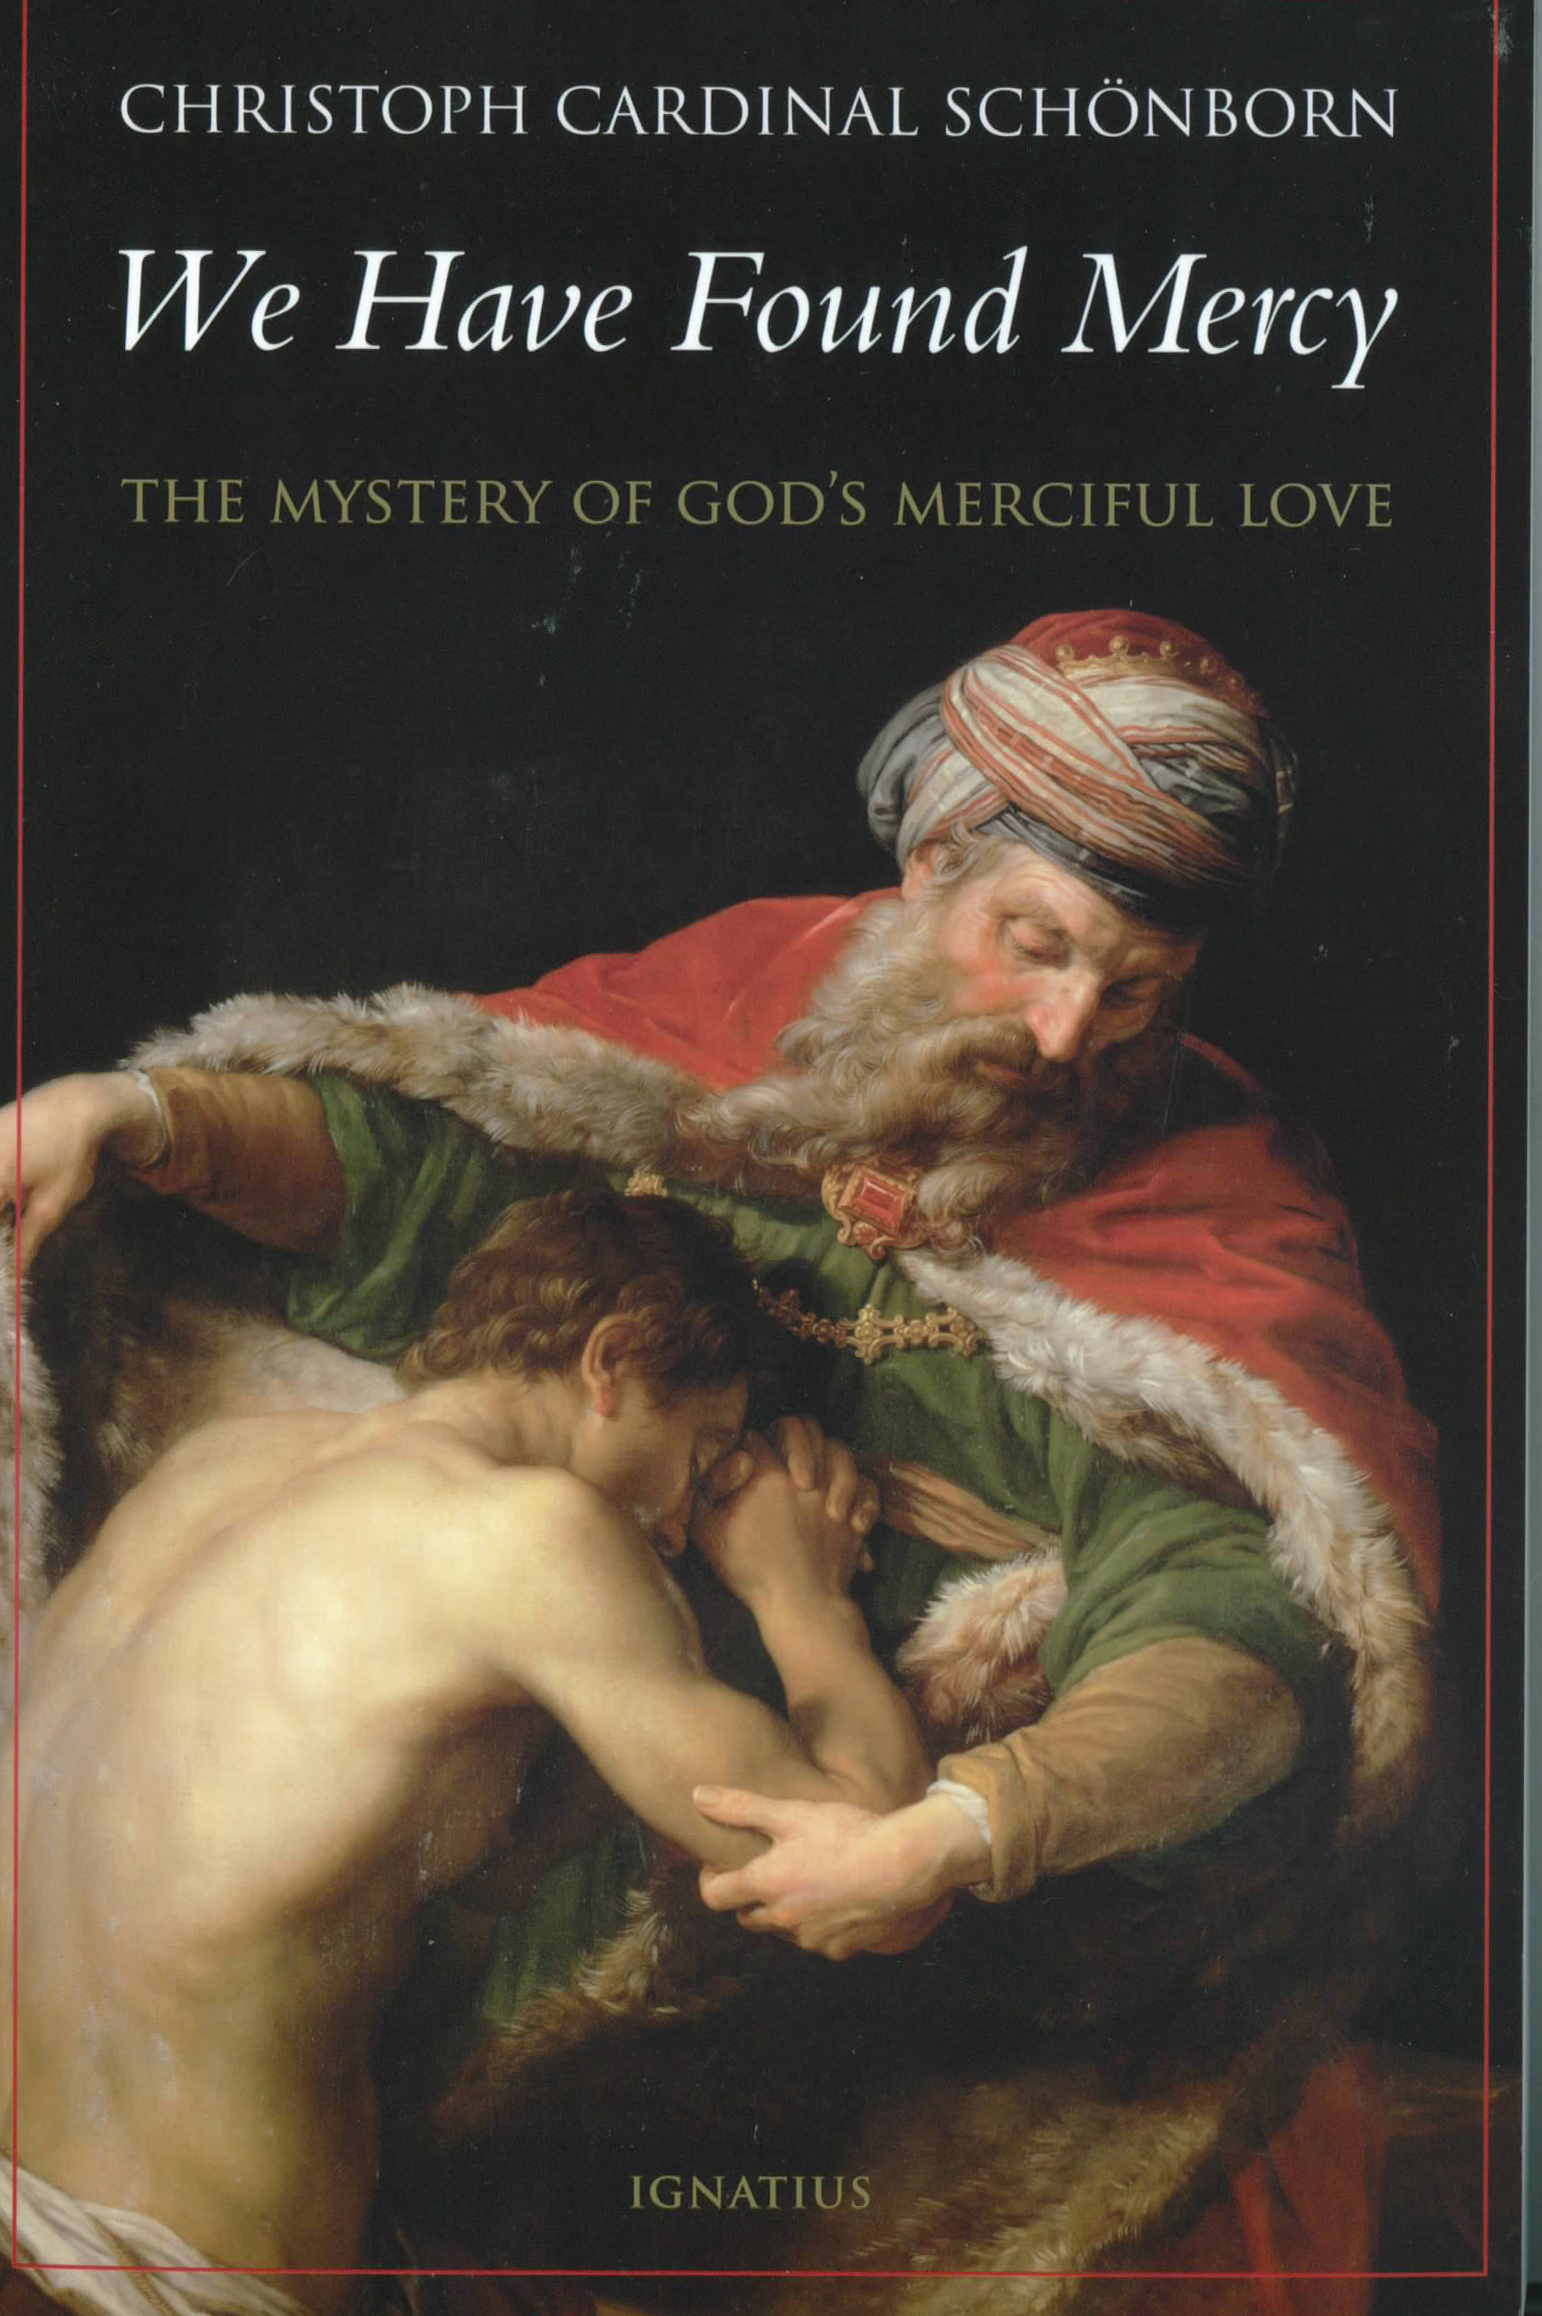 We Have Found Mercy: The Mystery of God's Merciful Love by Christoph Cardinal Schonborn 360-9781586174156